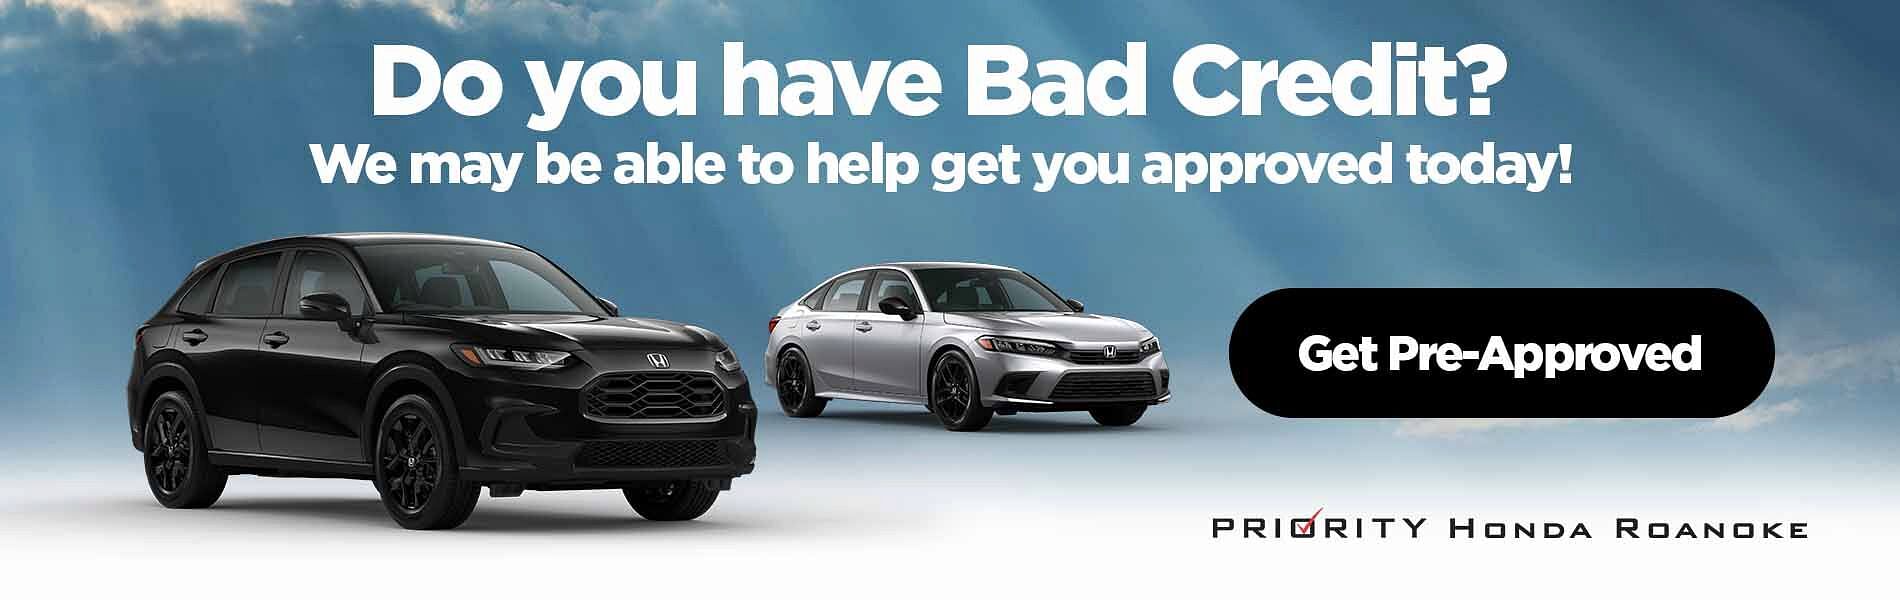 White Text Do you have Bad Credit? We Can Get you Approved Today!. Below two honda cars & black button with white text Get Pre-Approved